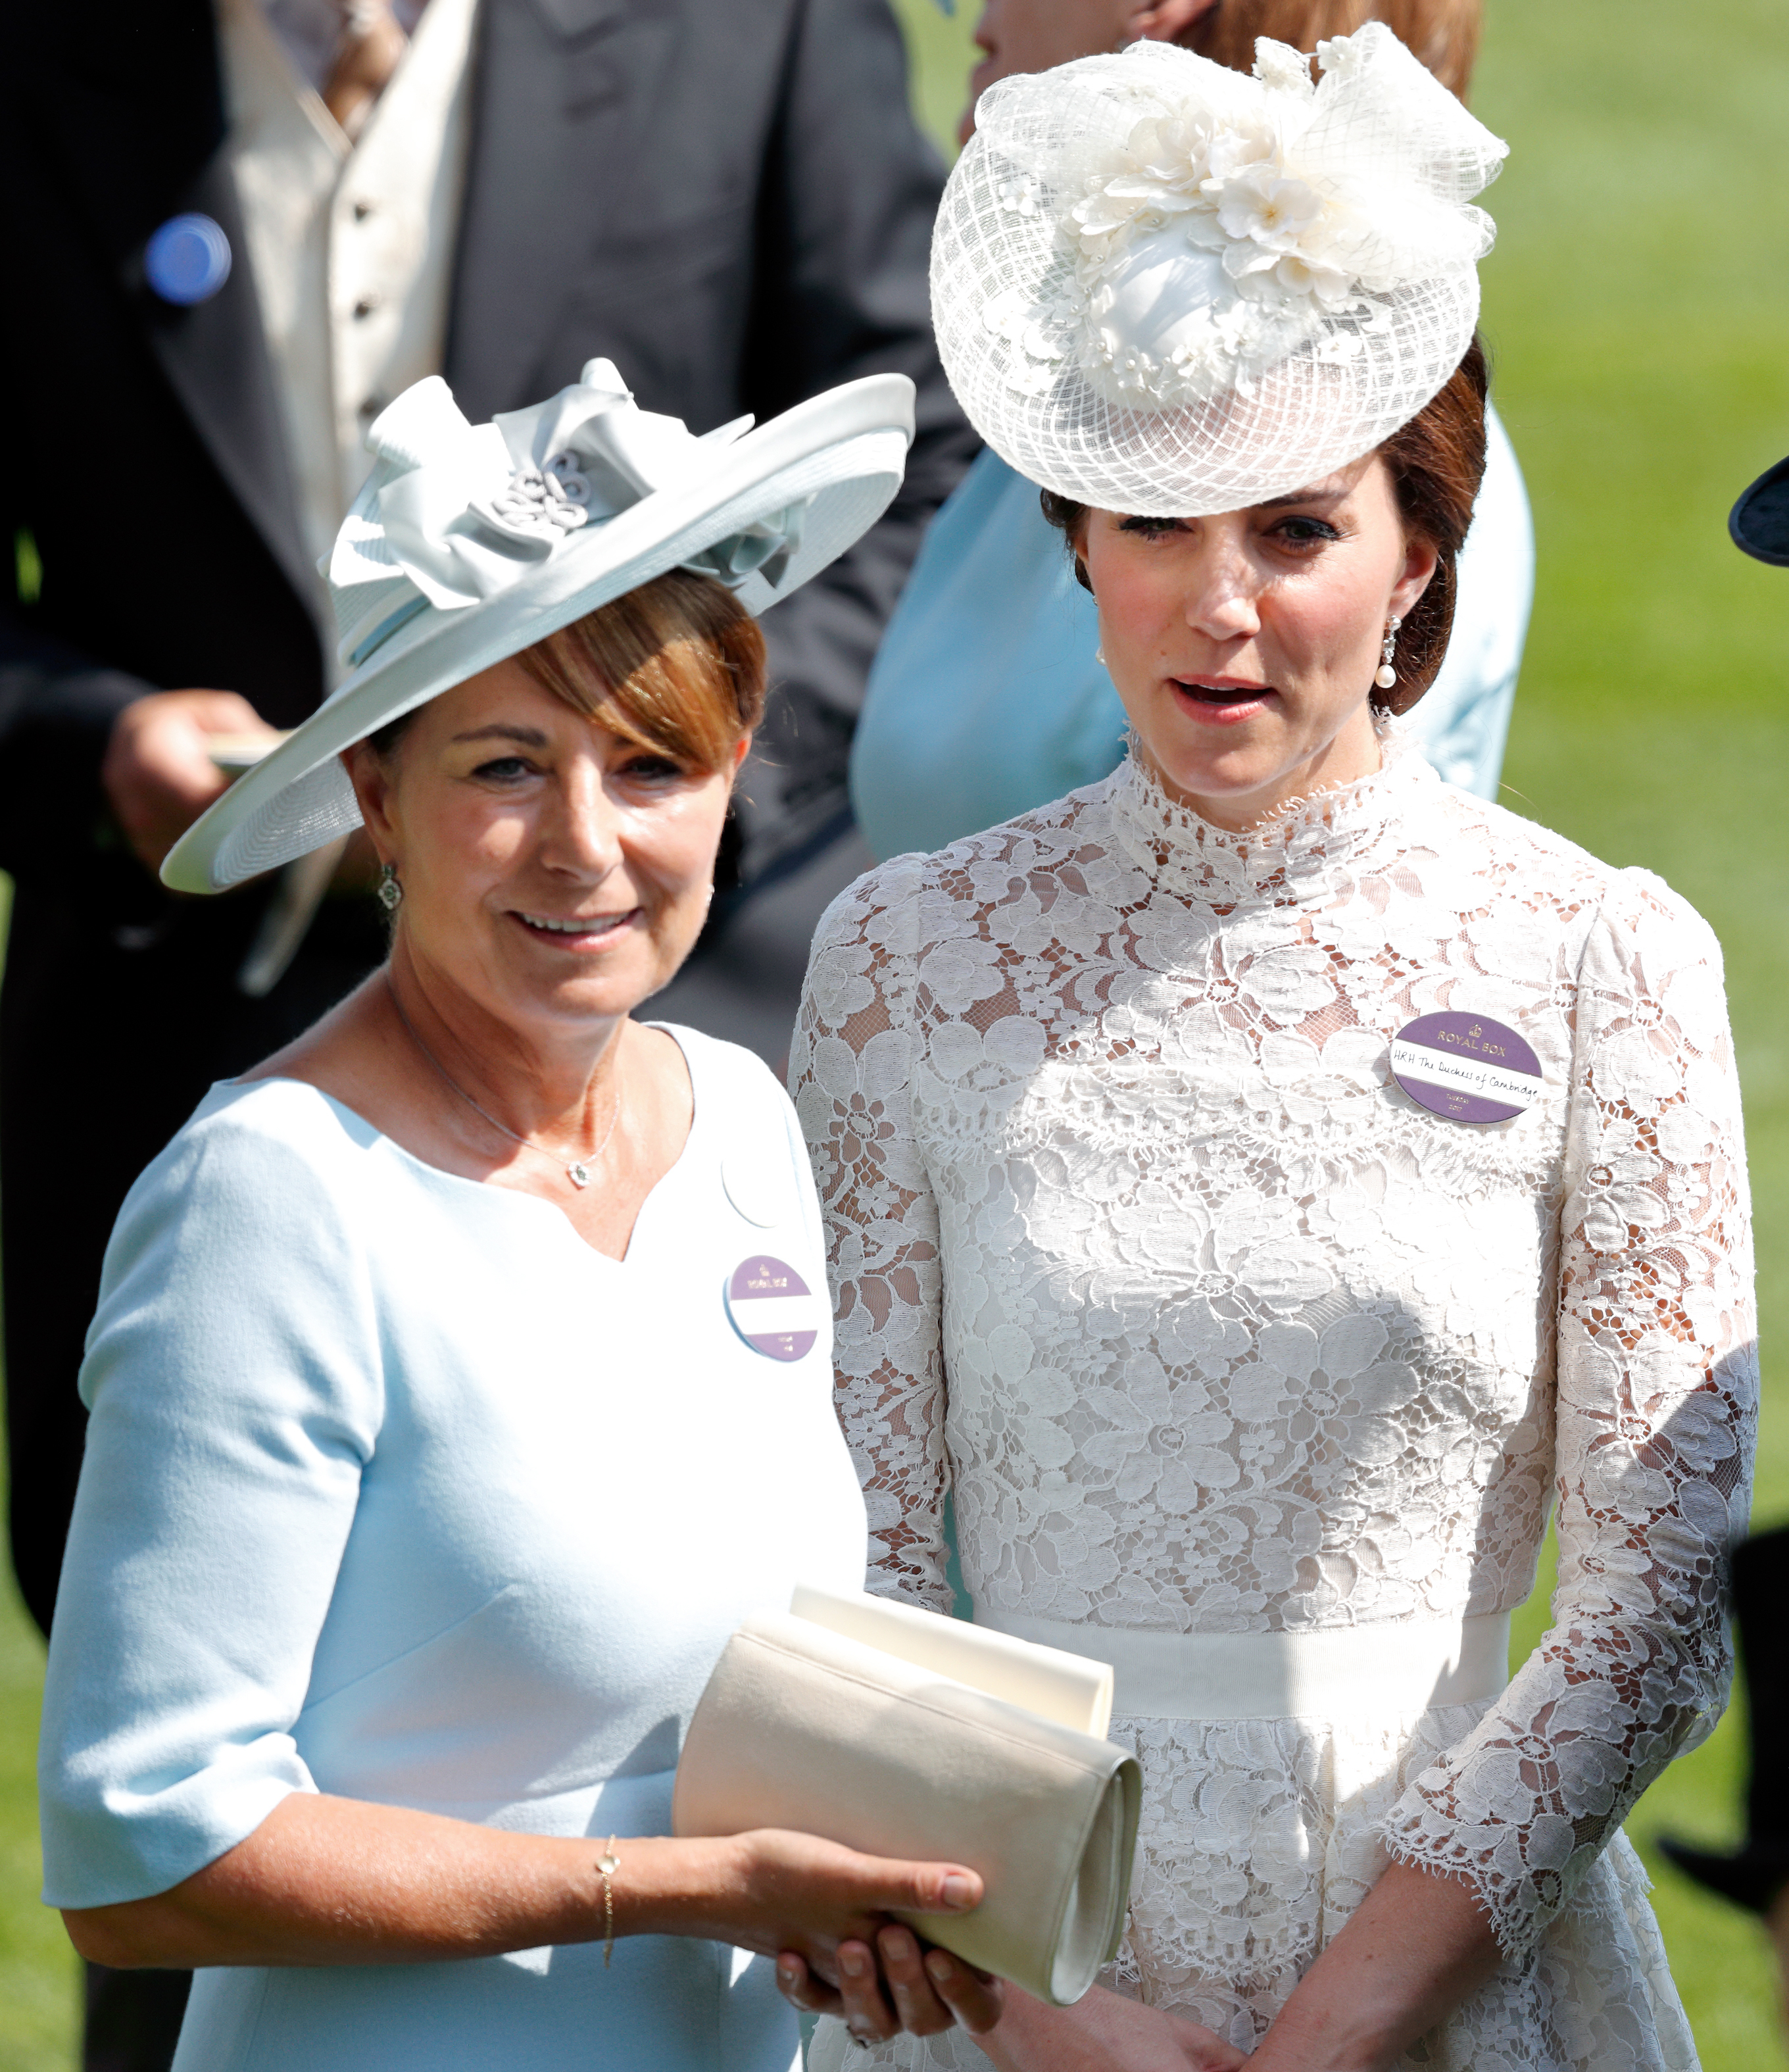 Two women in elegant hats and formal attire at an outdoor event